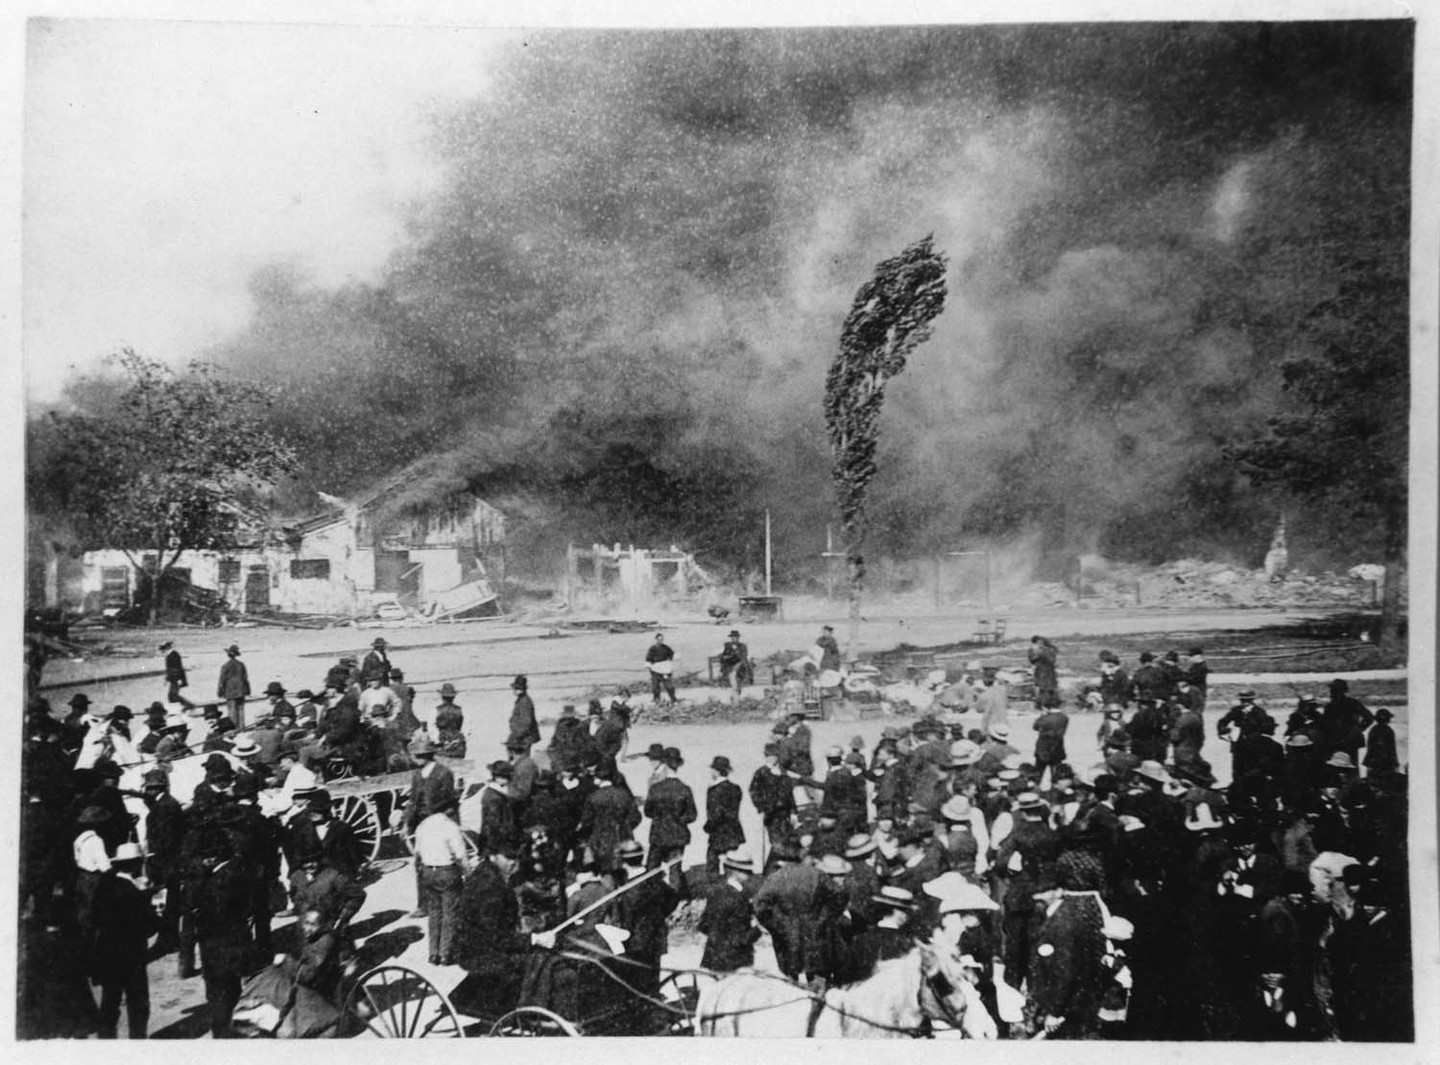 A black and white photo with a blazing city and people watching in the foreground.